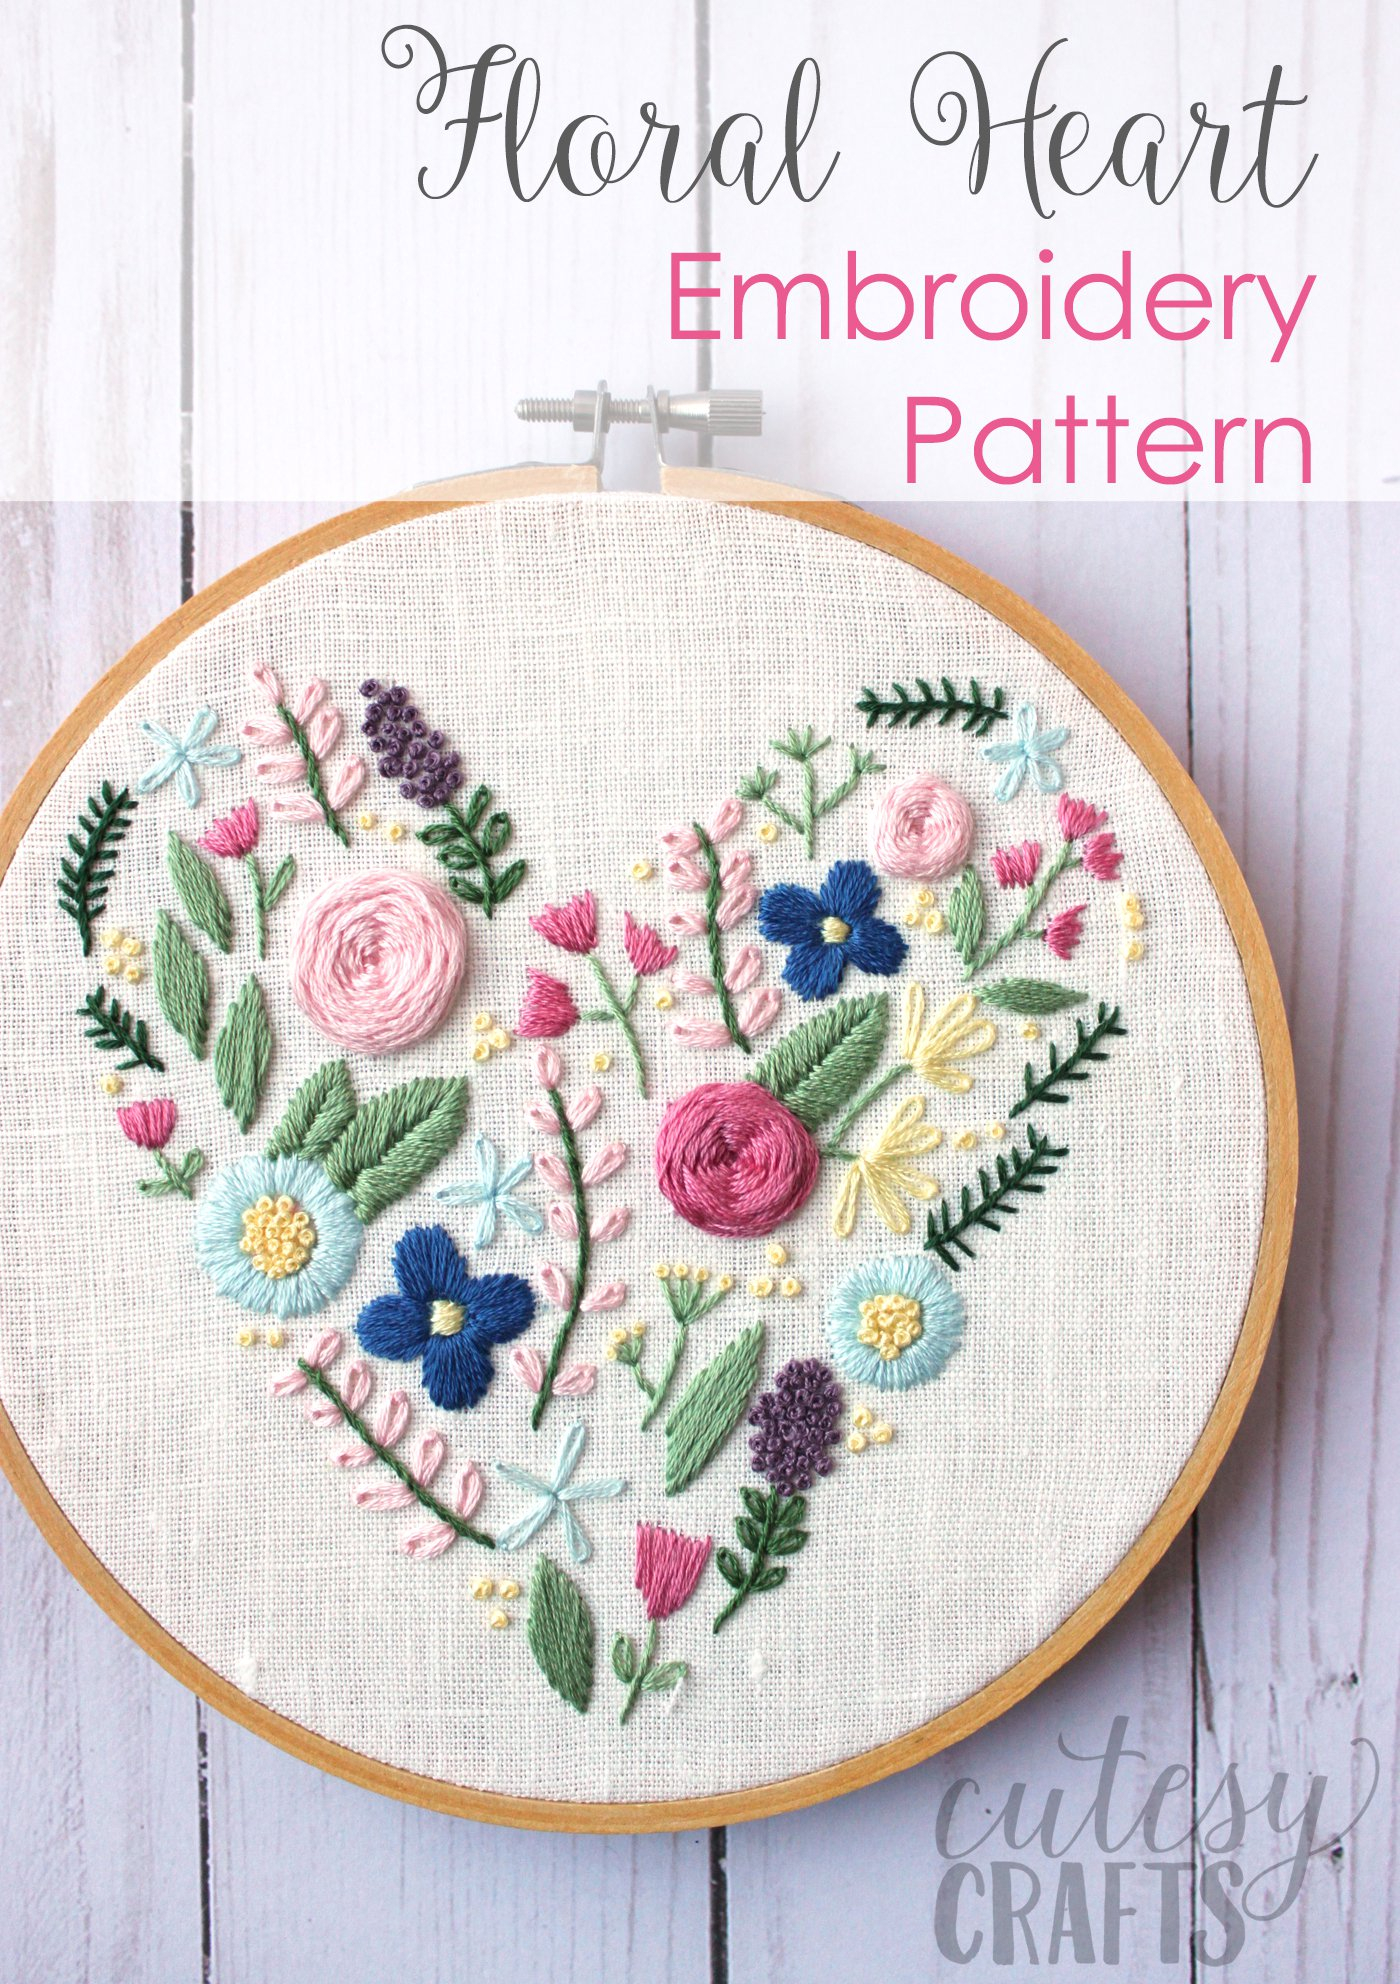 How To Make Embroidery Patterns Floral Heart Hand Embroidery Pattern The Polka Dot Chair